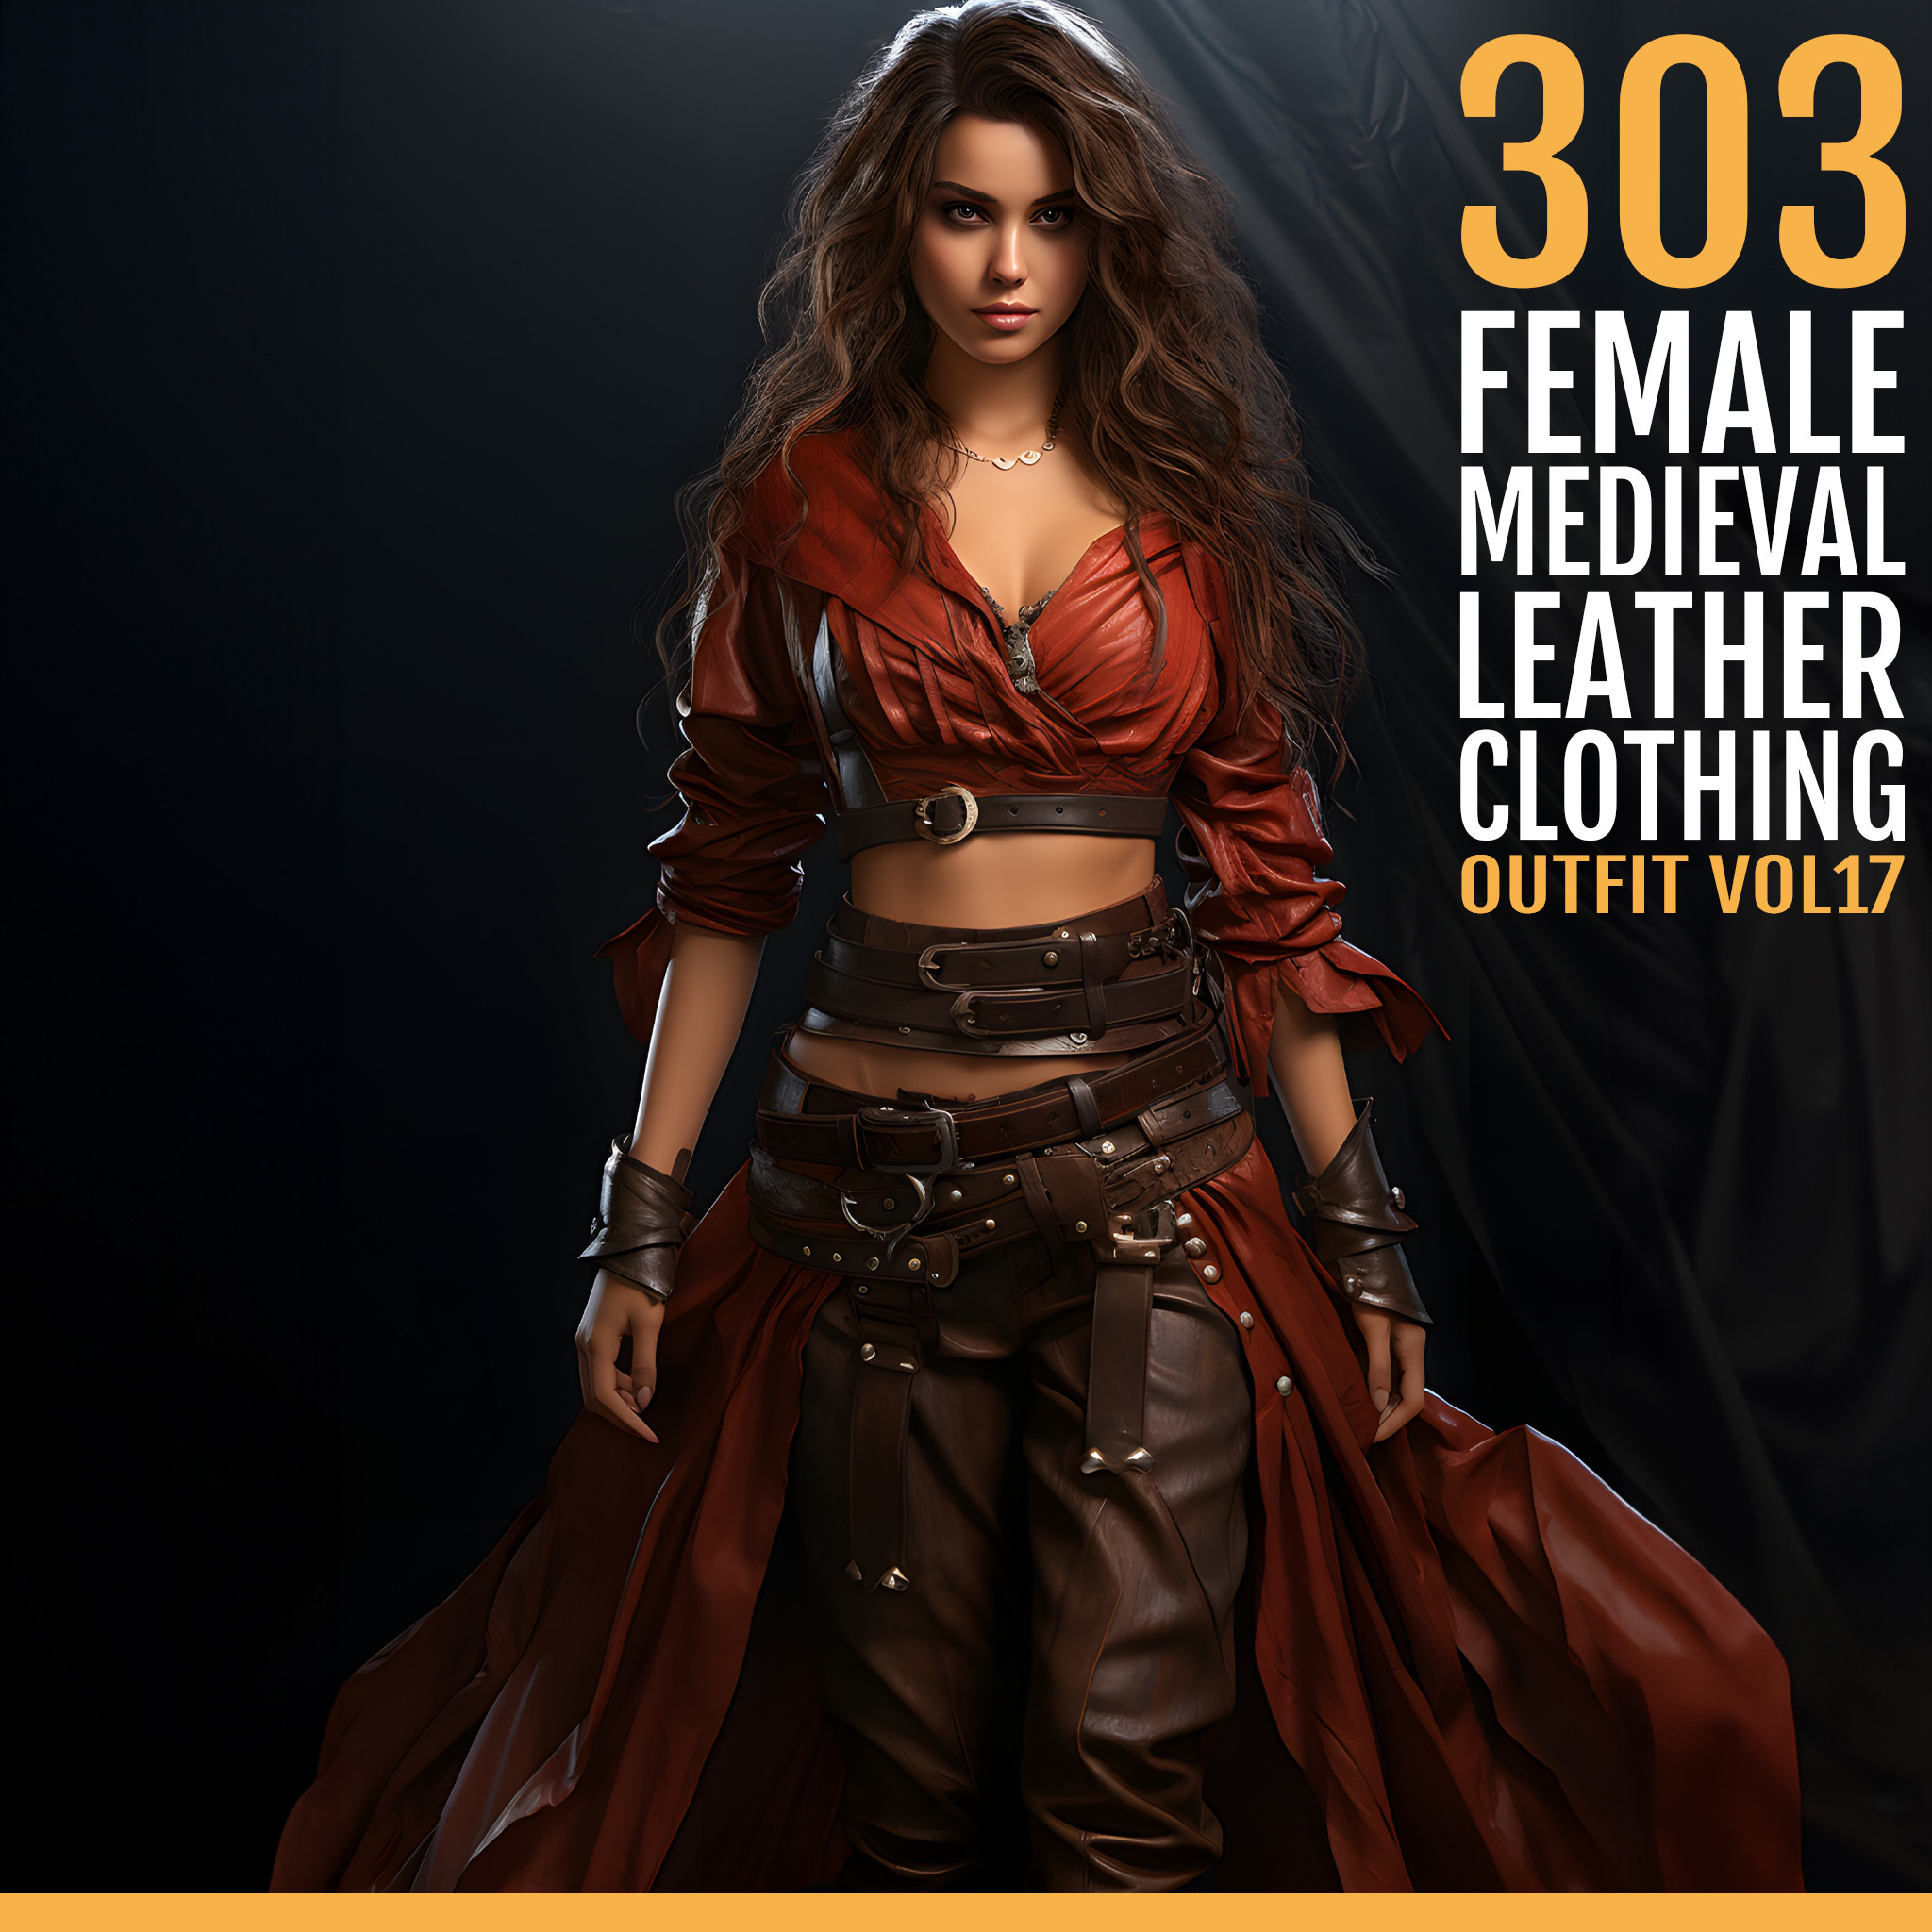 303 Women's Medieval Leather Clothing VOL17 - ArtStation